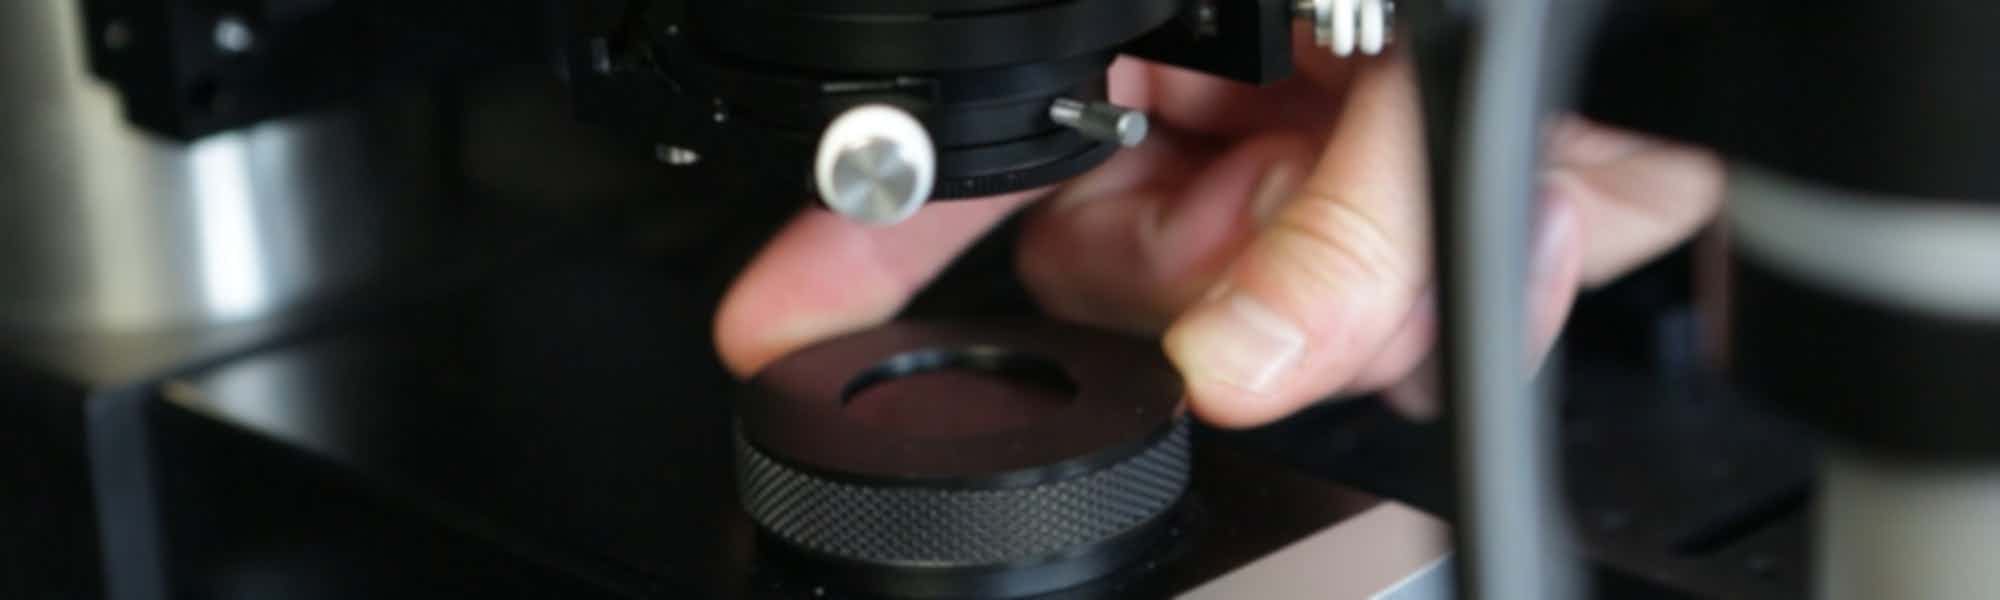 A guide to setting up Differential Interference Contrast on your upright microscope